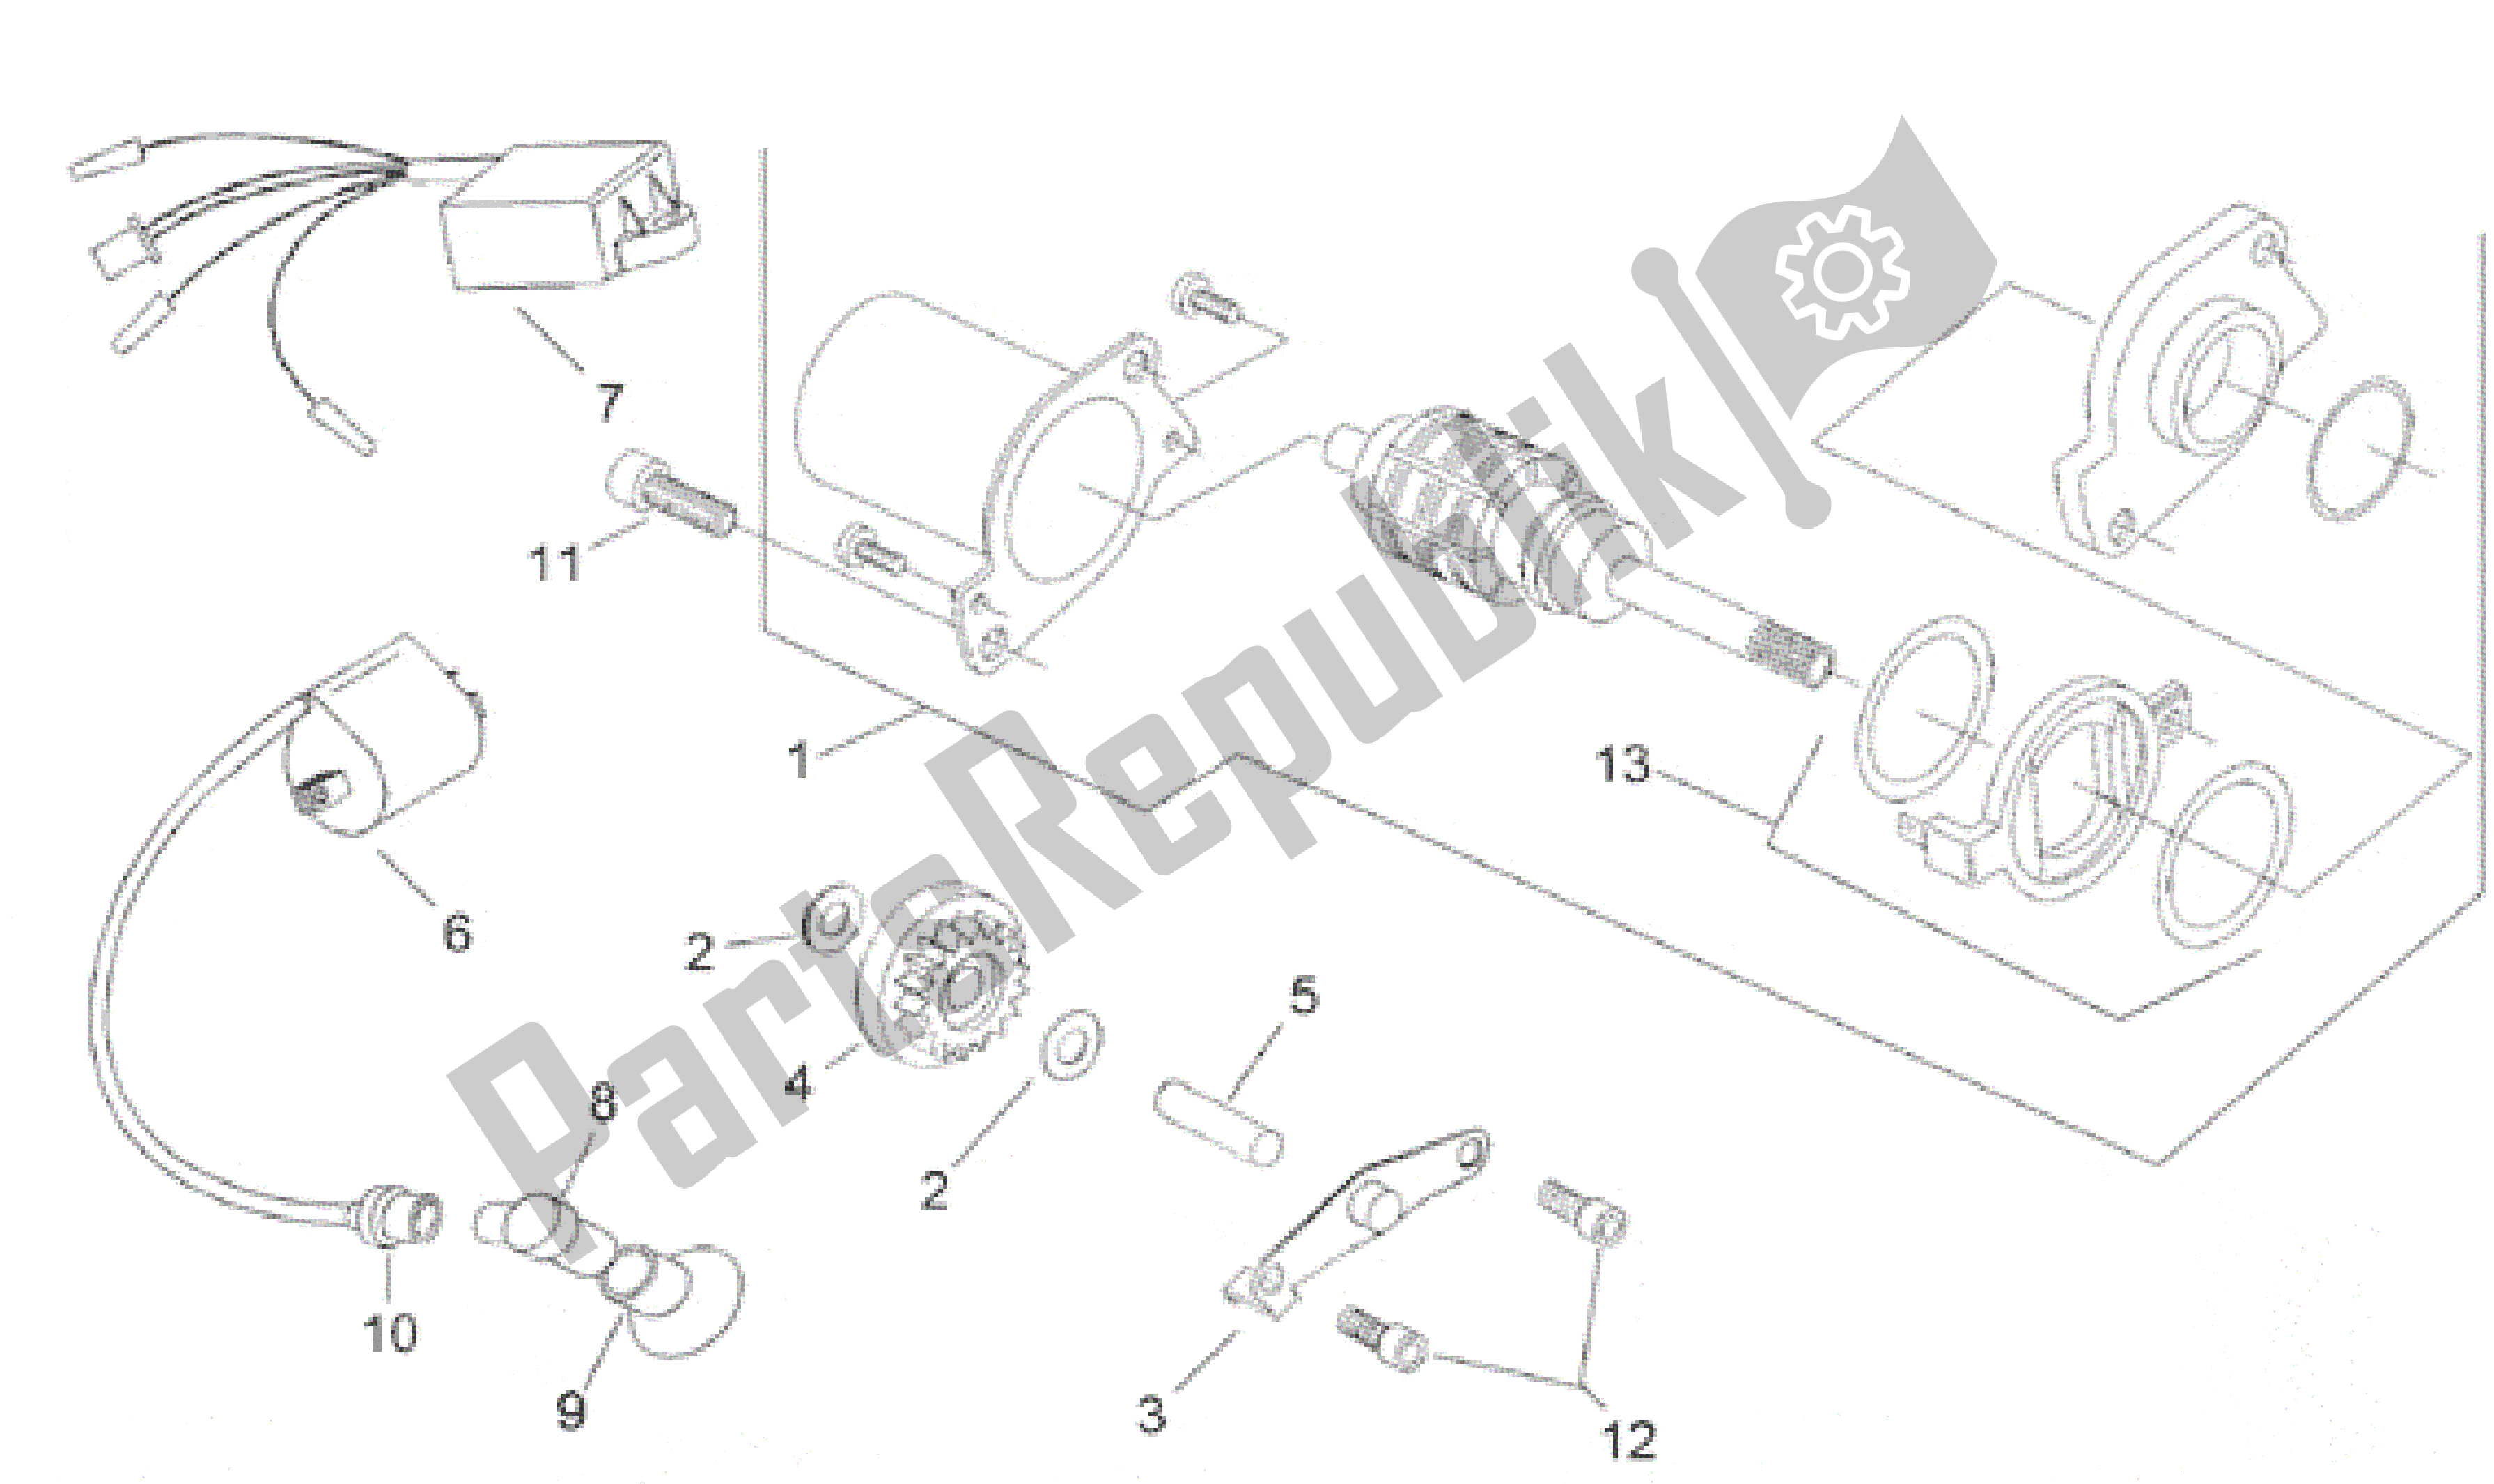 All parts for the Ignition Unit of the Aprilia Gulliver 50 1996 - 1998